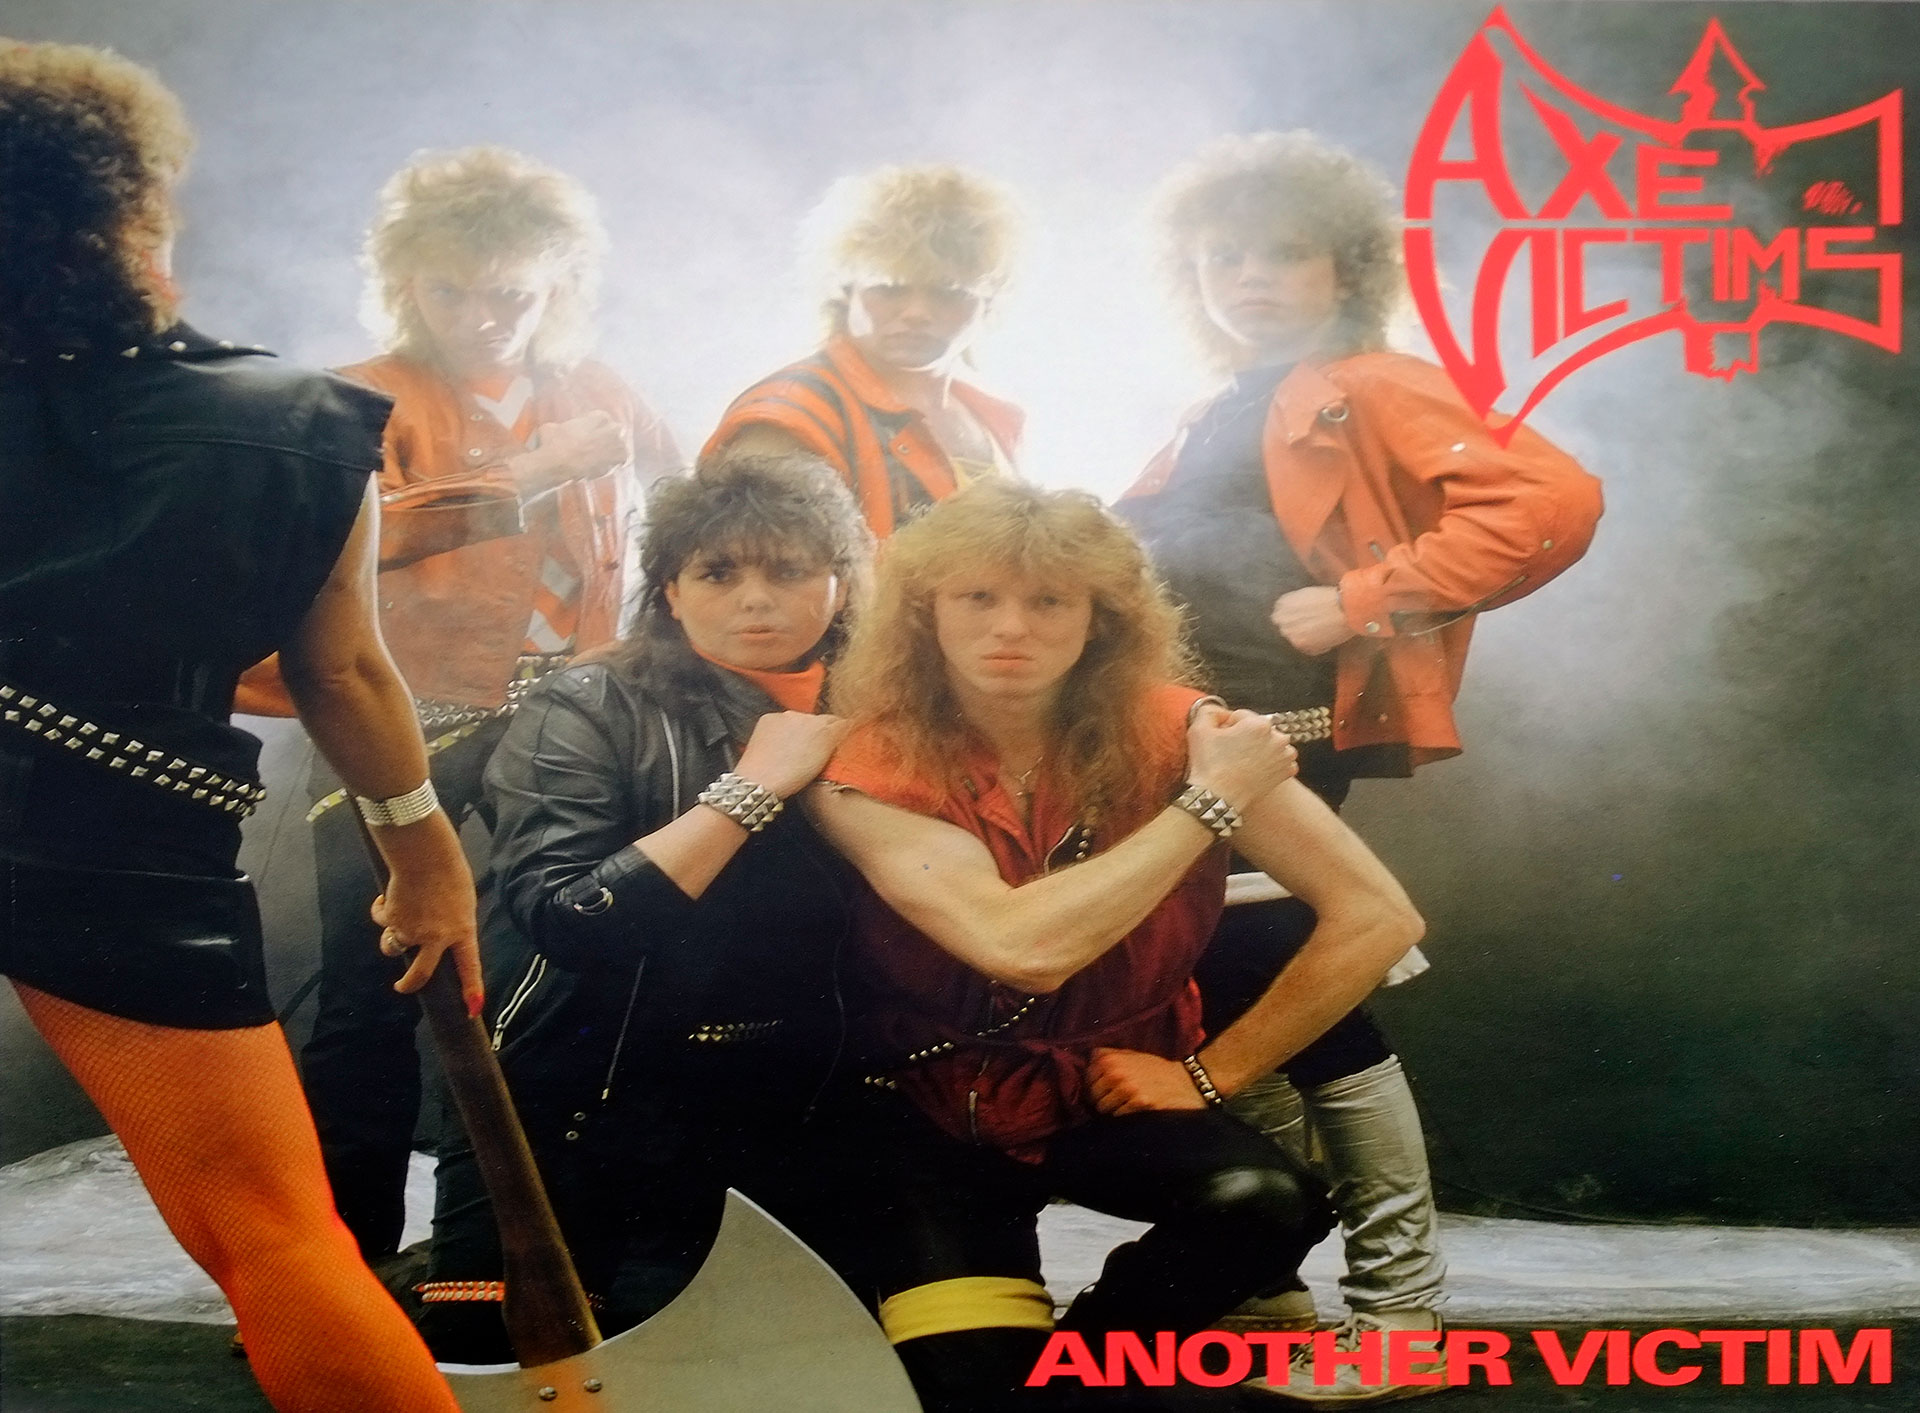 Album Front Cover Photo of AXE VICTIMS ANOTHER VICTIM 